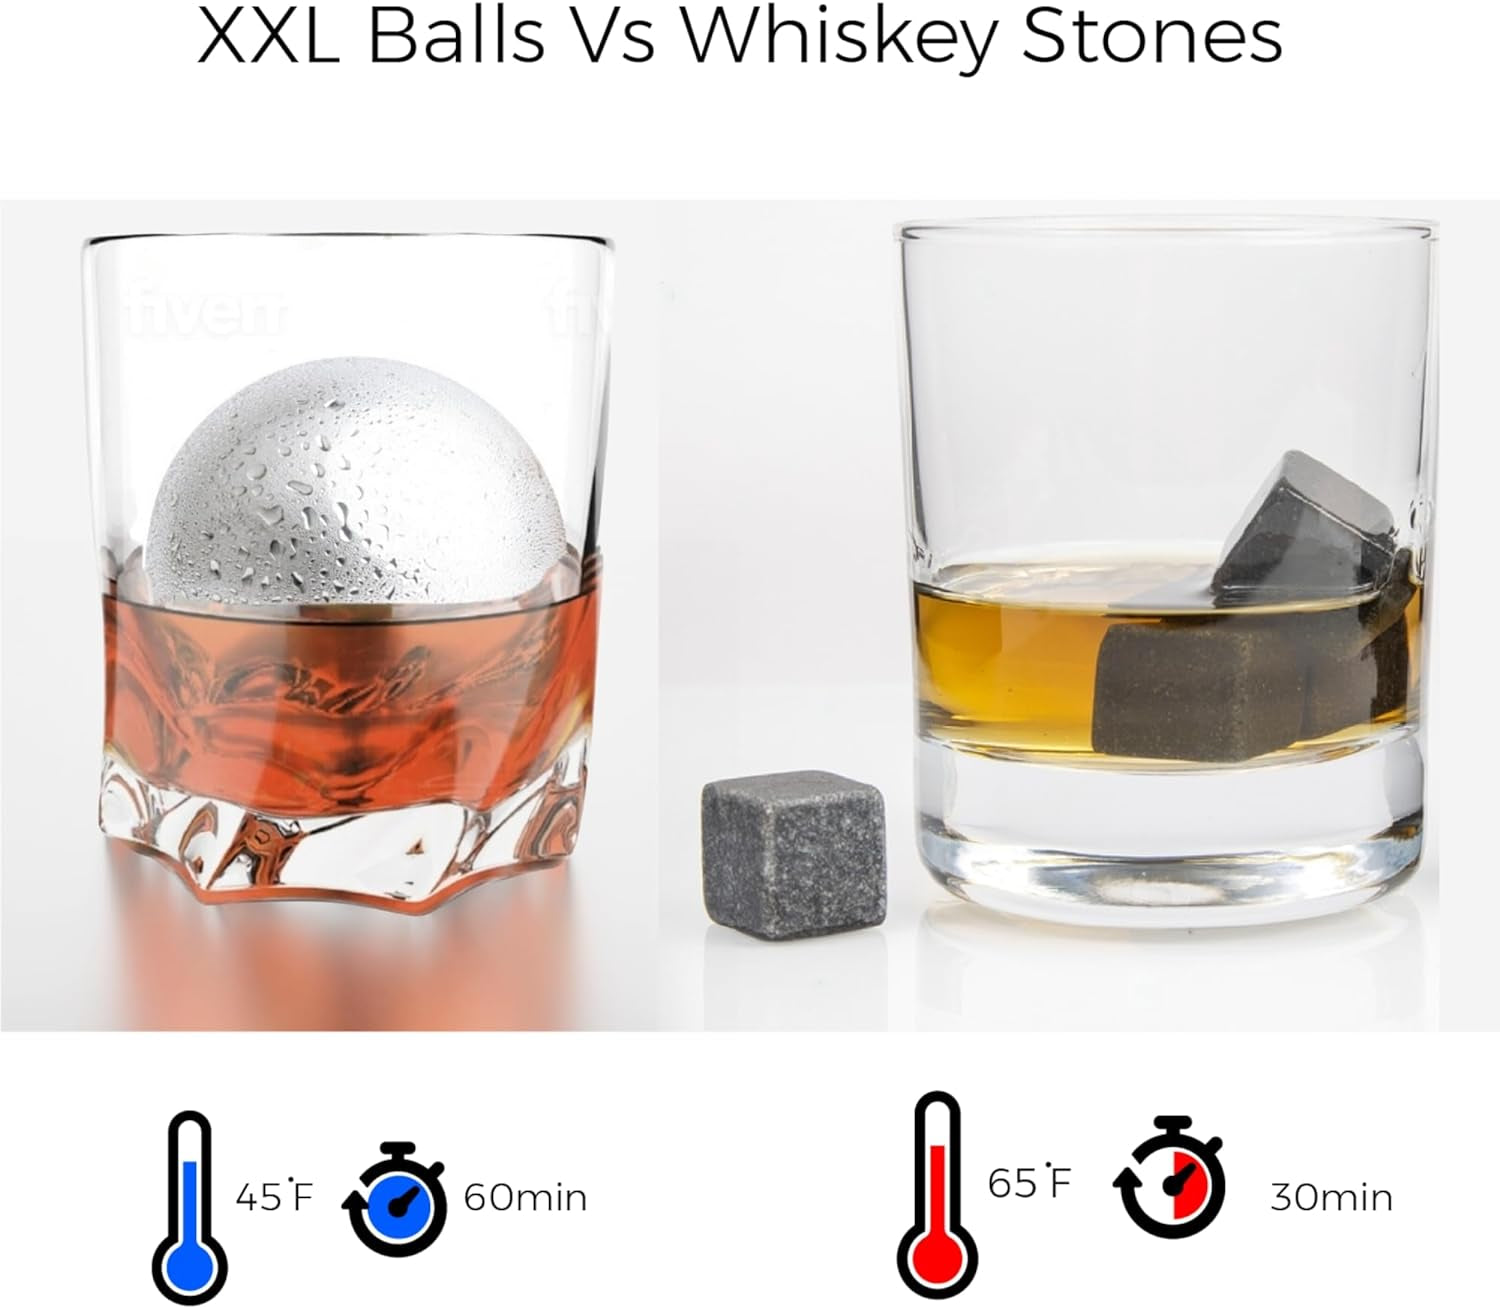 4 Premium XXL 55Mm Stainless Steel Ice Whiskey Balls with Freezer Tray and Resealable Pouch -Whiskey Rocks Chilling Stones, Whiskey Stone Ice Cube Balls, round Chilling Rocks